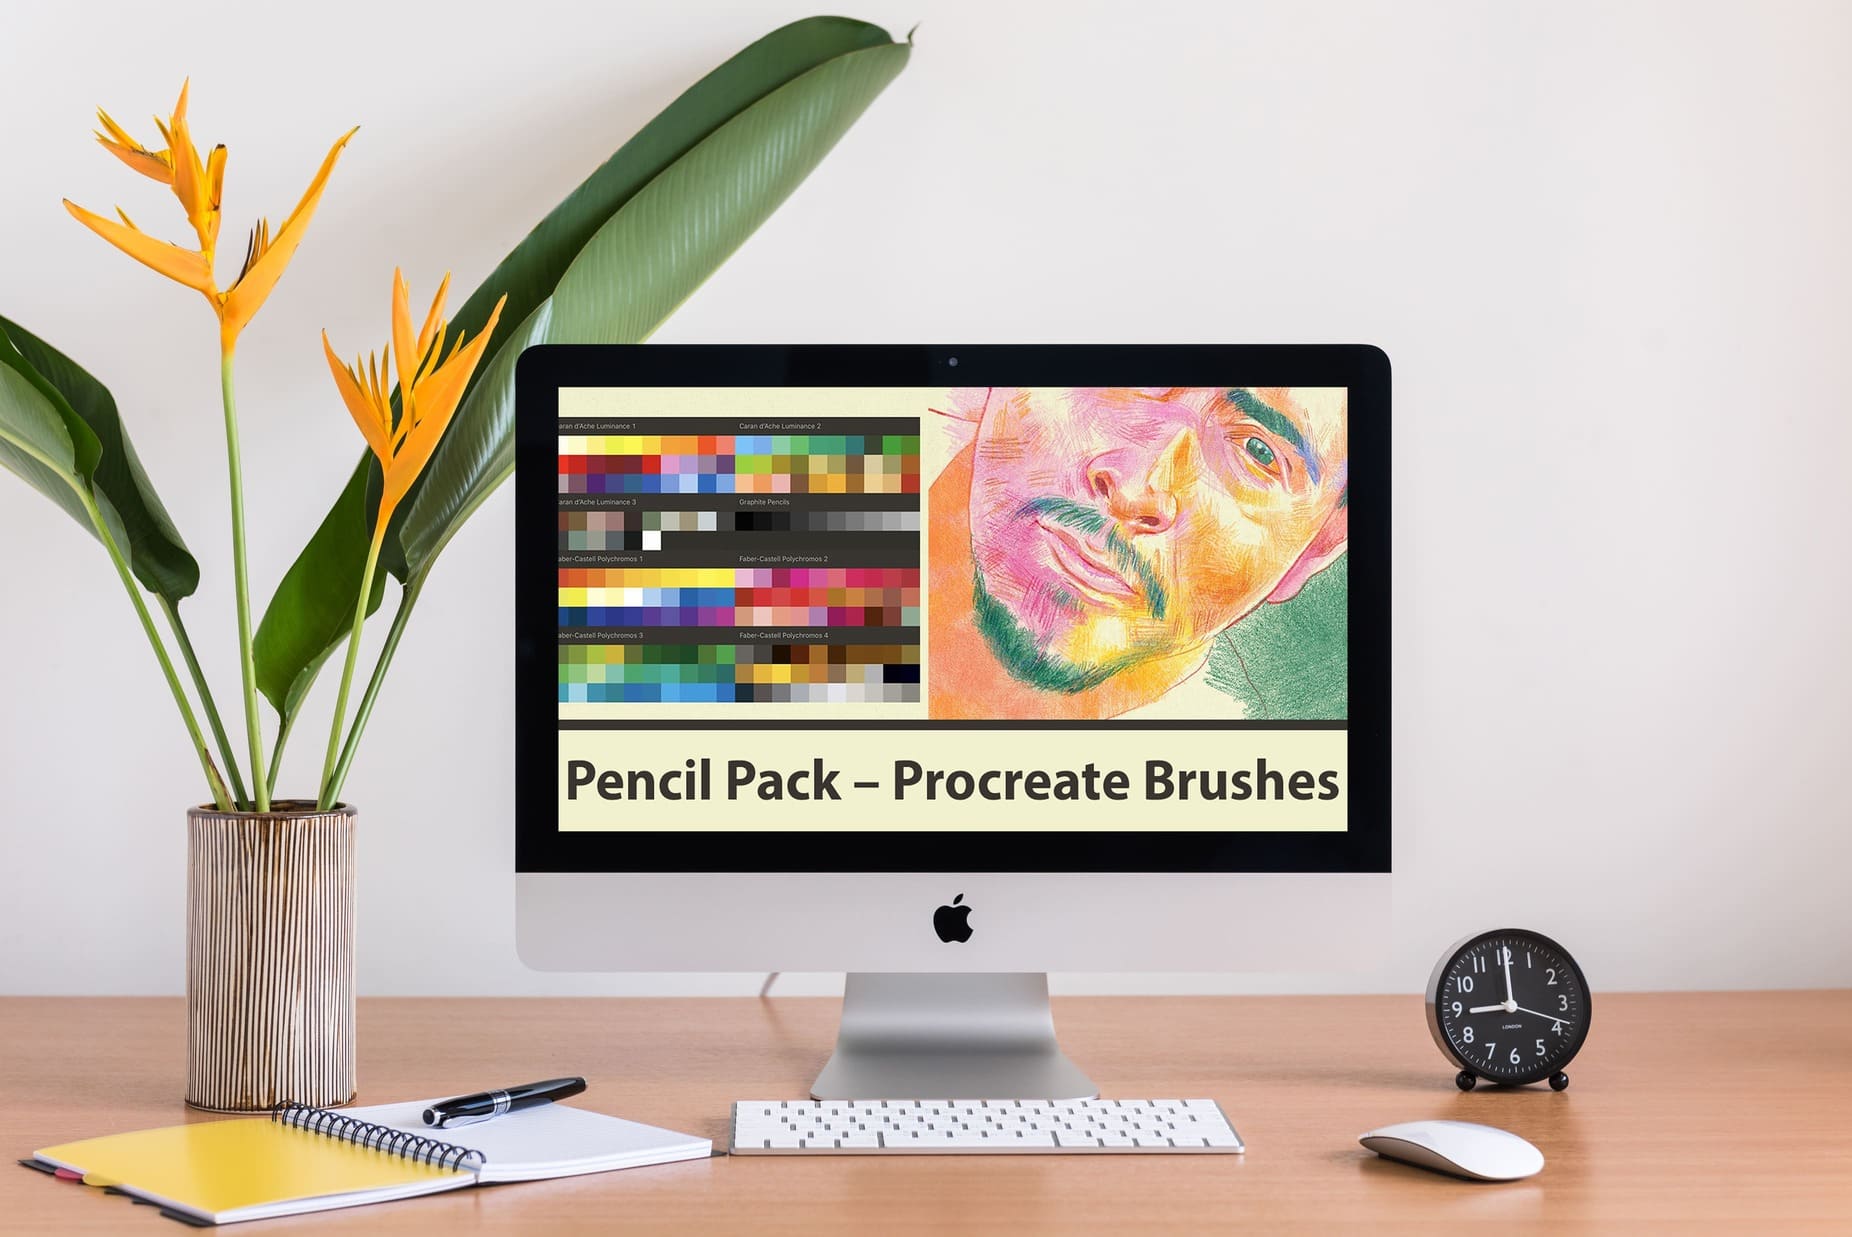 Pencil Pack- Procreate Brushes On The Monoblock.